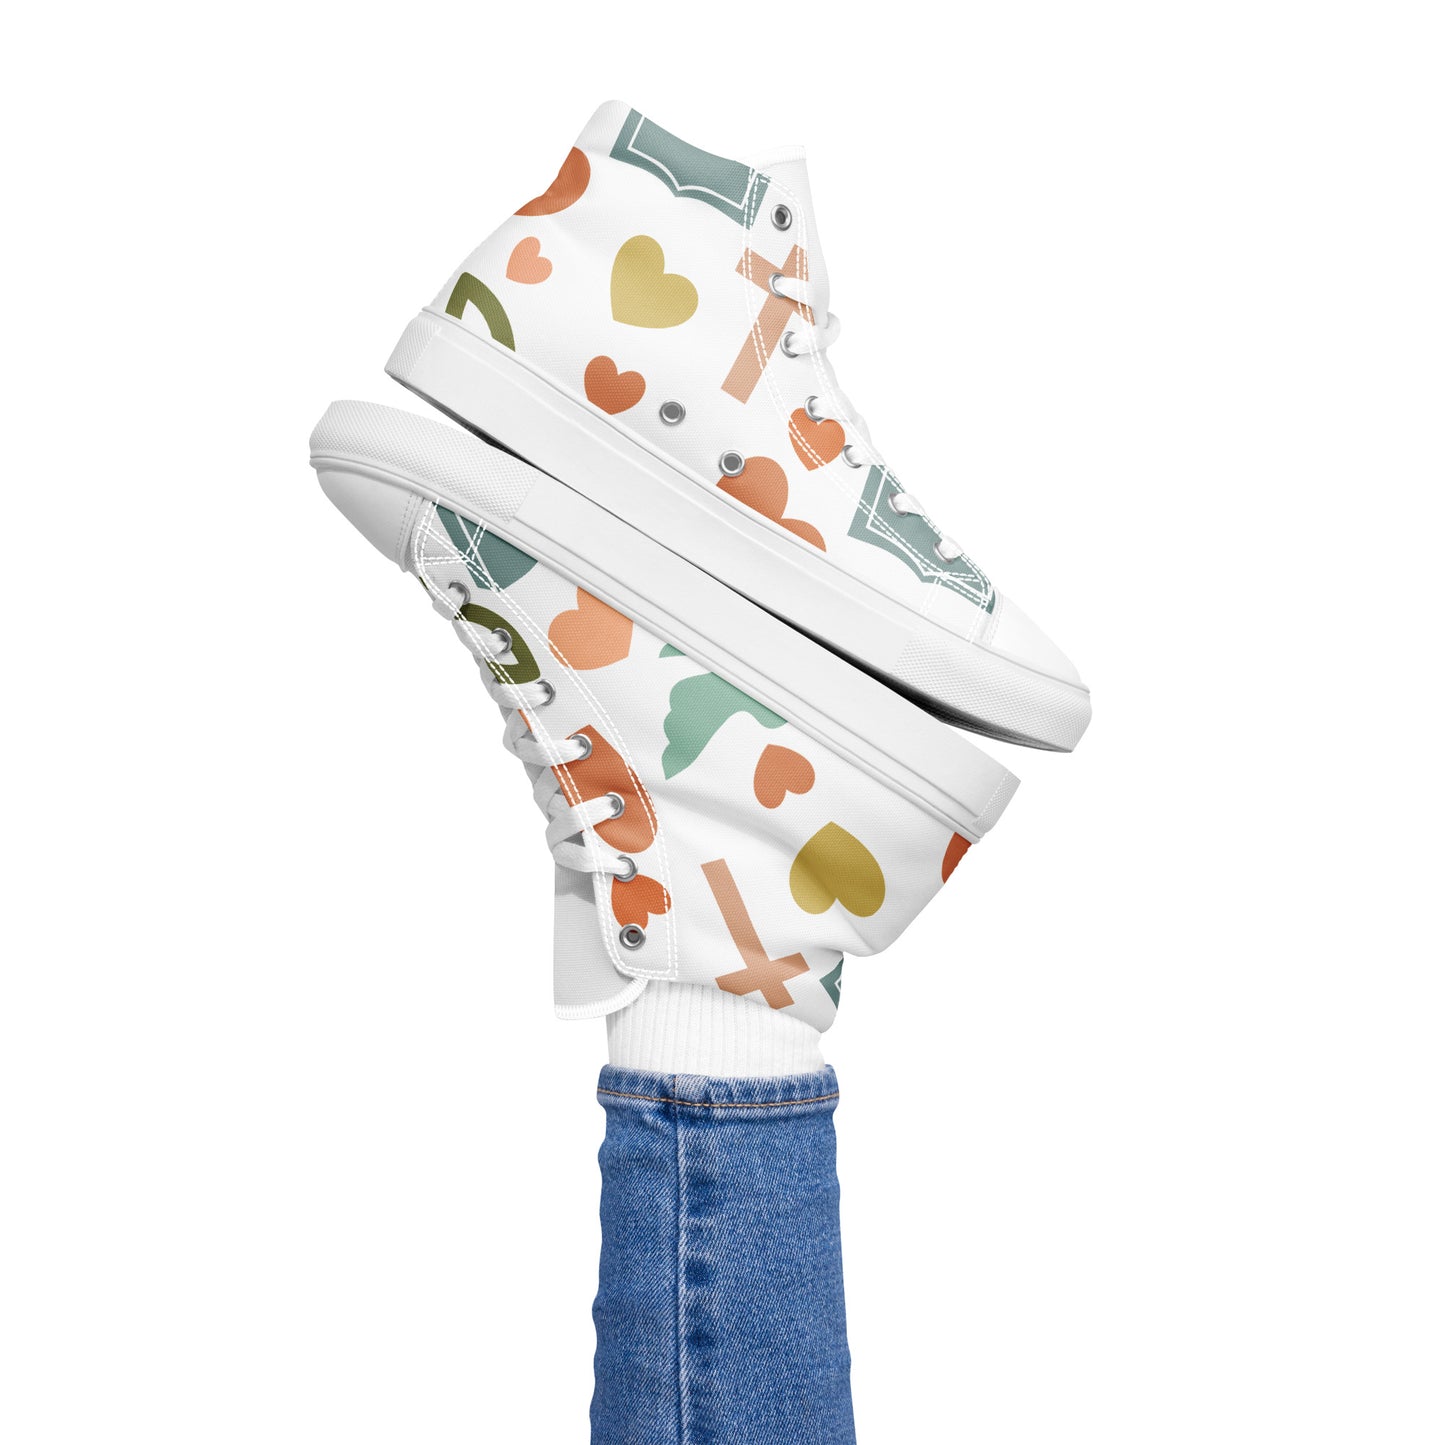 Faith in the Footsteps Women’s high top canvas shoes